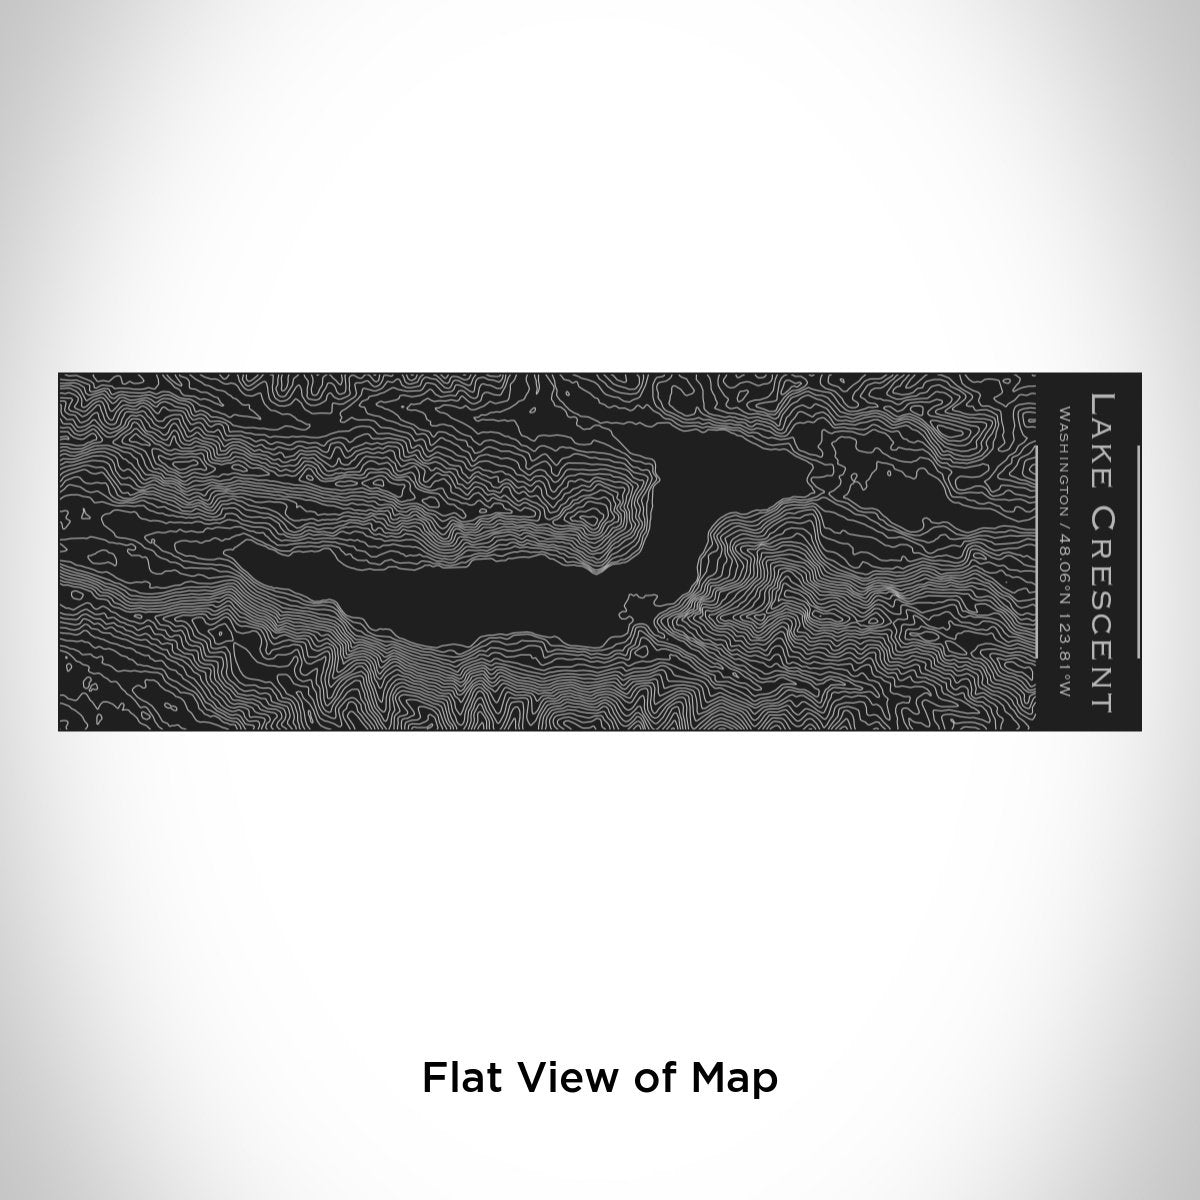 Lake Crescent - Washington Engraved Topographic Map Insulated Cup in